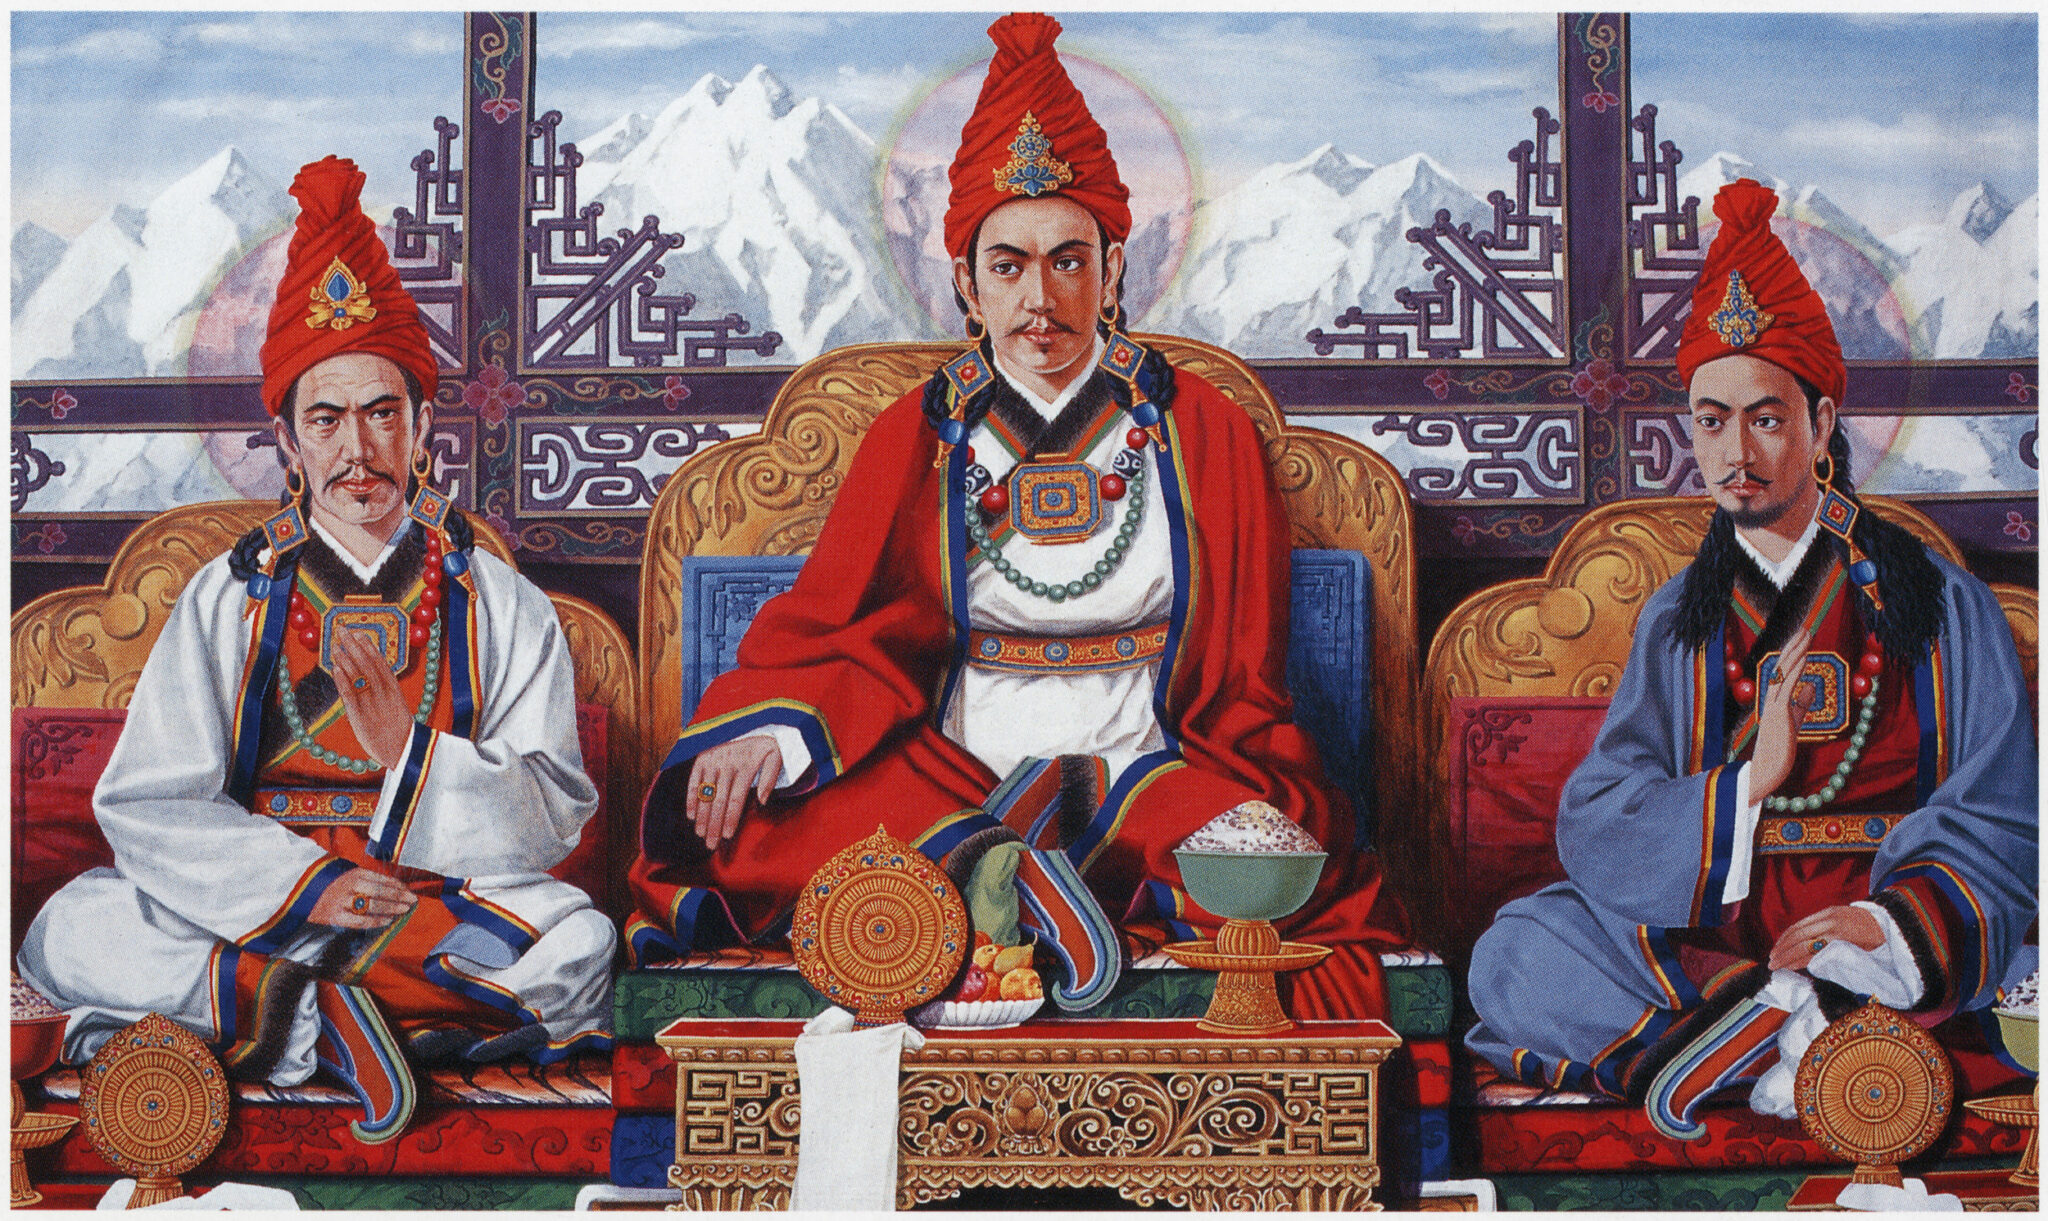 Painting depicting three men wearing red turbans seated cross-legged on thrones before mountain landscape